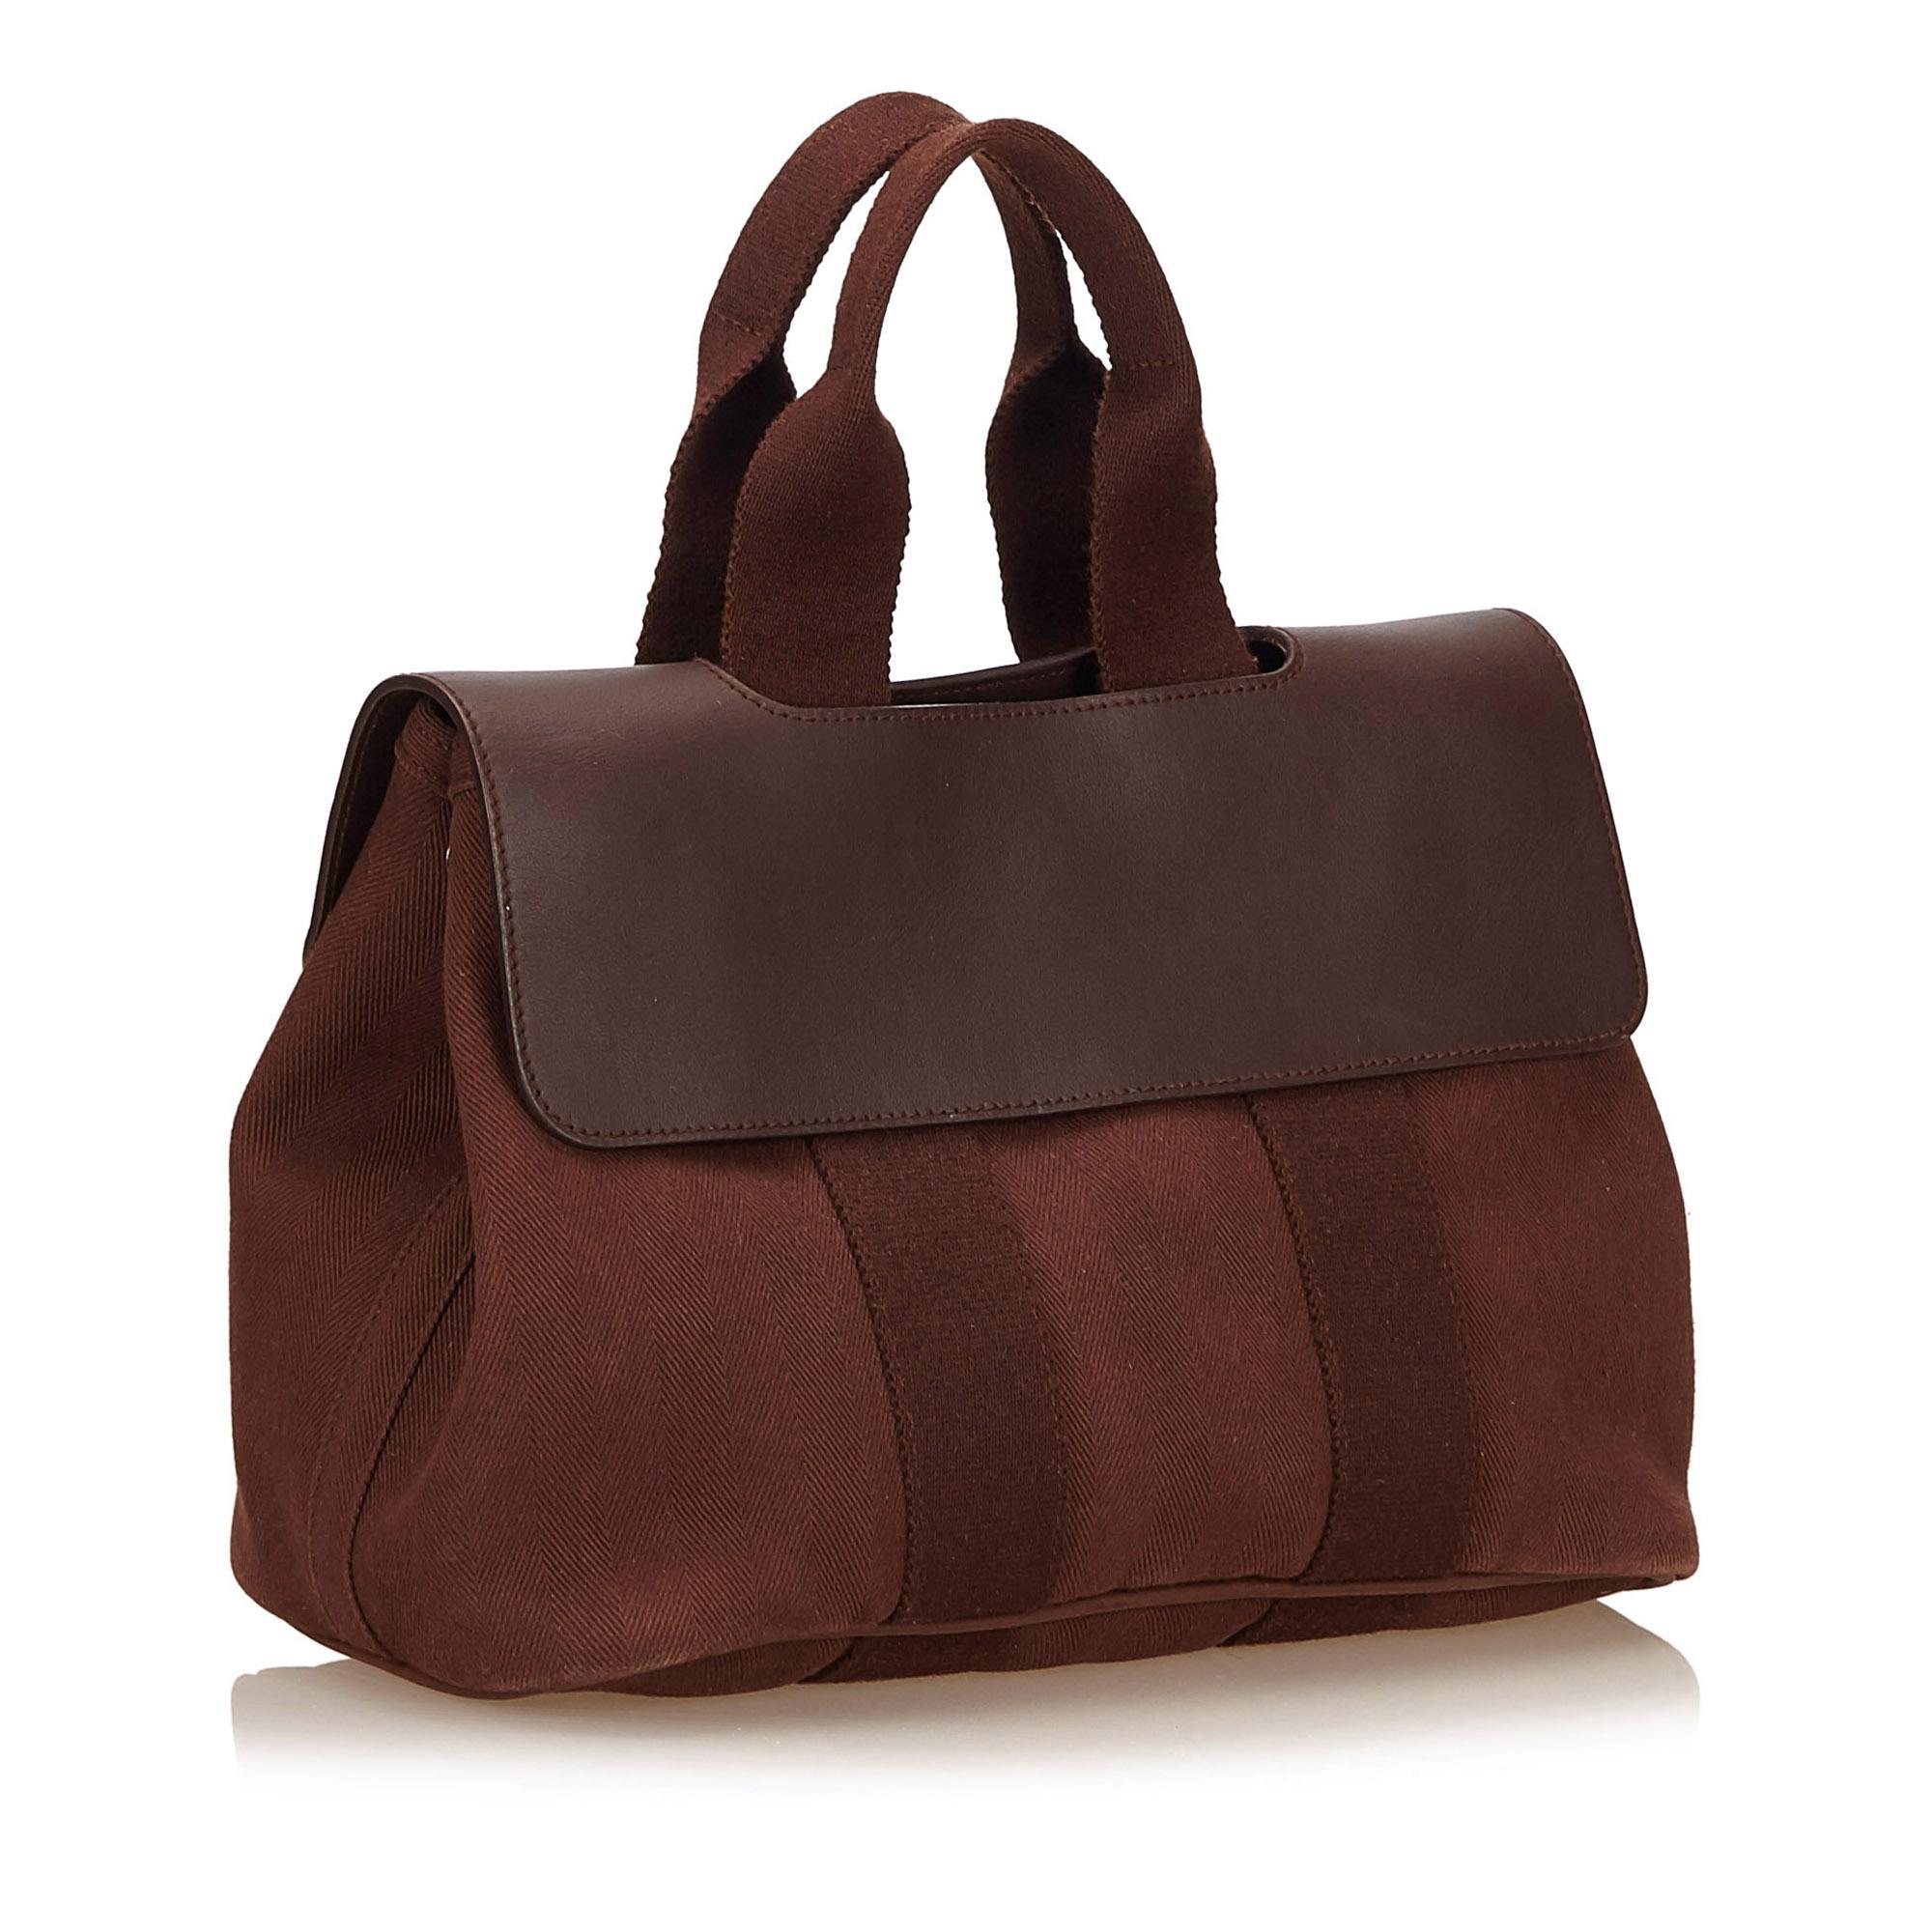 The Valparaiso PM features a canvas body, a leather front flap, a top clasp closure, and an interior slip pocket.

It carries a B condition rating.

Dimensions: 
Length 30 cm
Width 20 cm
Depth 13 cm
Hand Drop 11 

Inclusions: Pouch

Color: Brown x